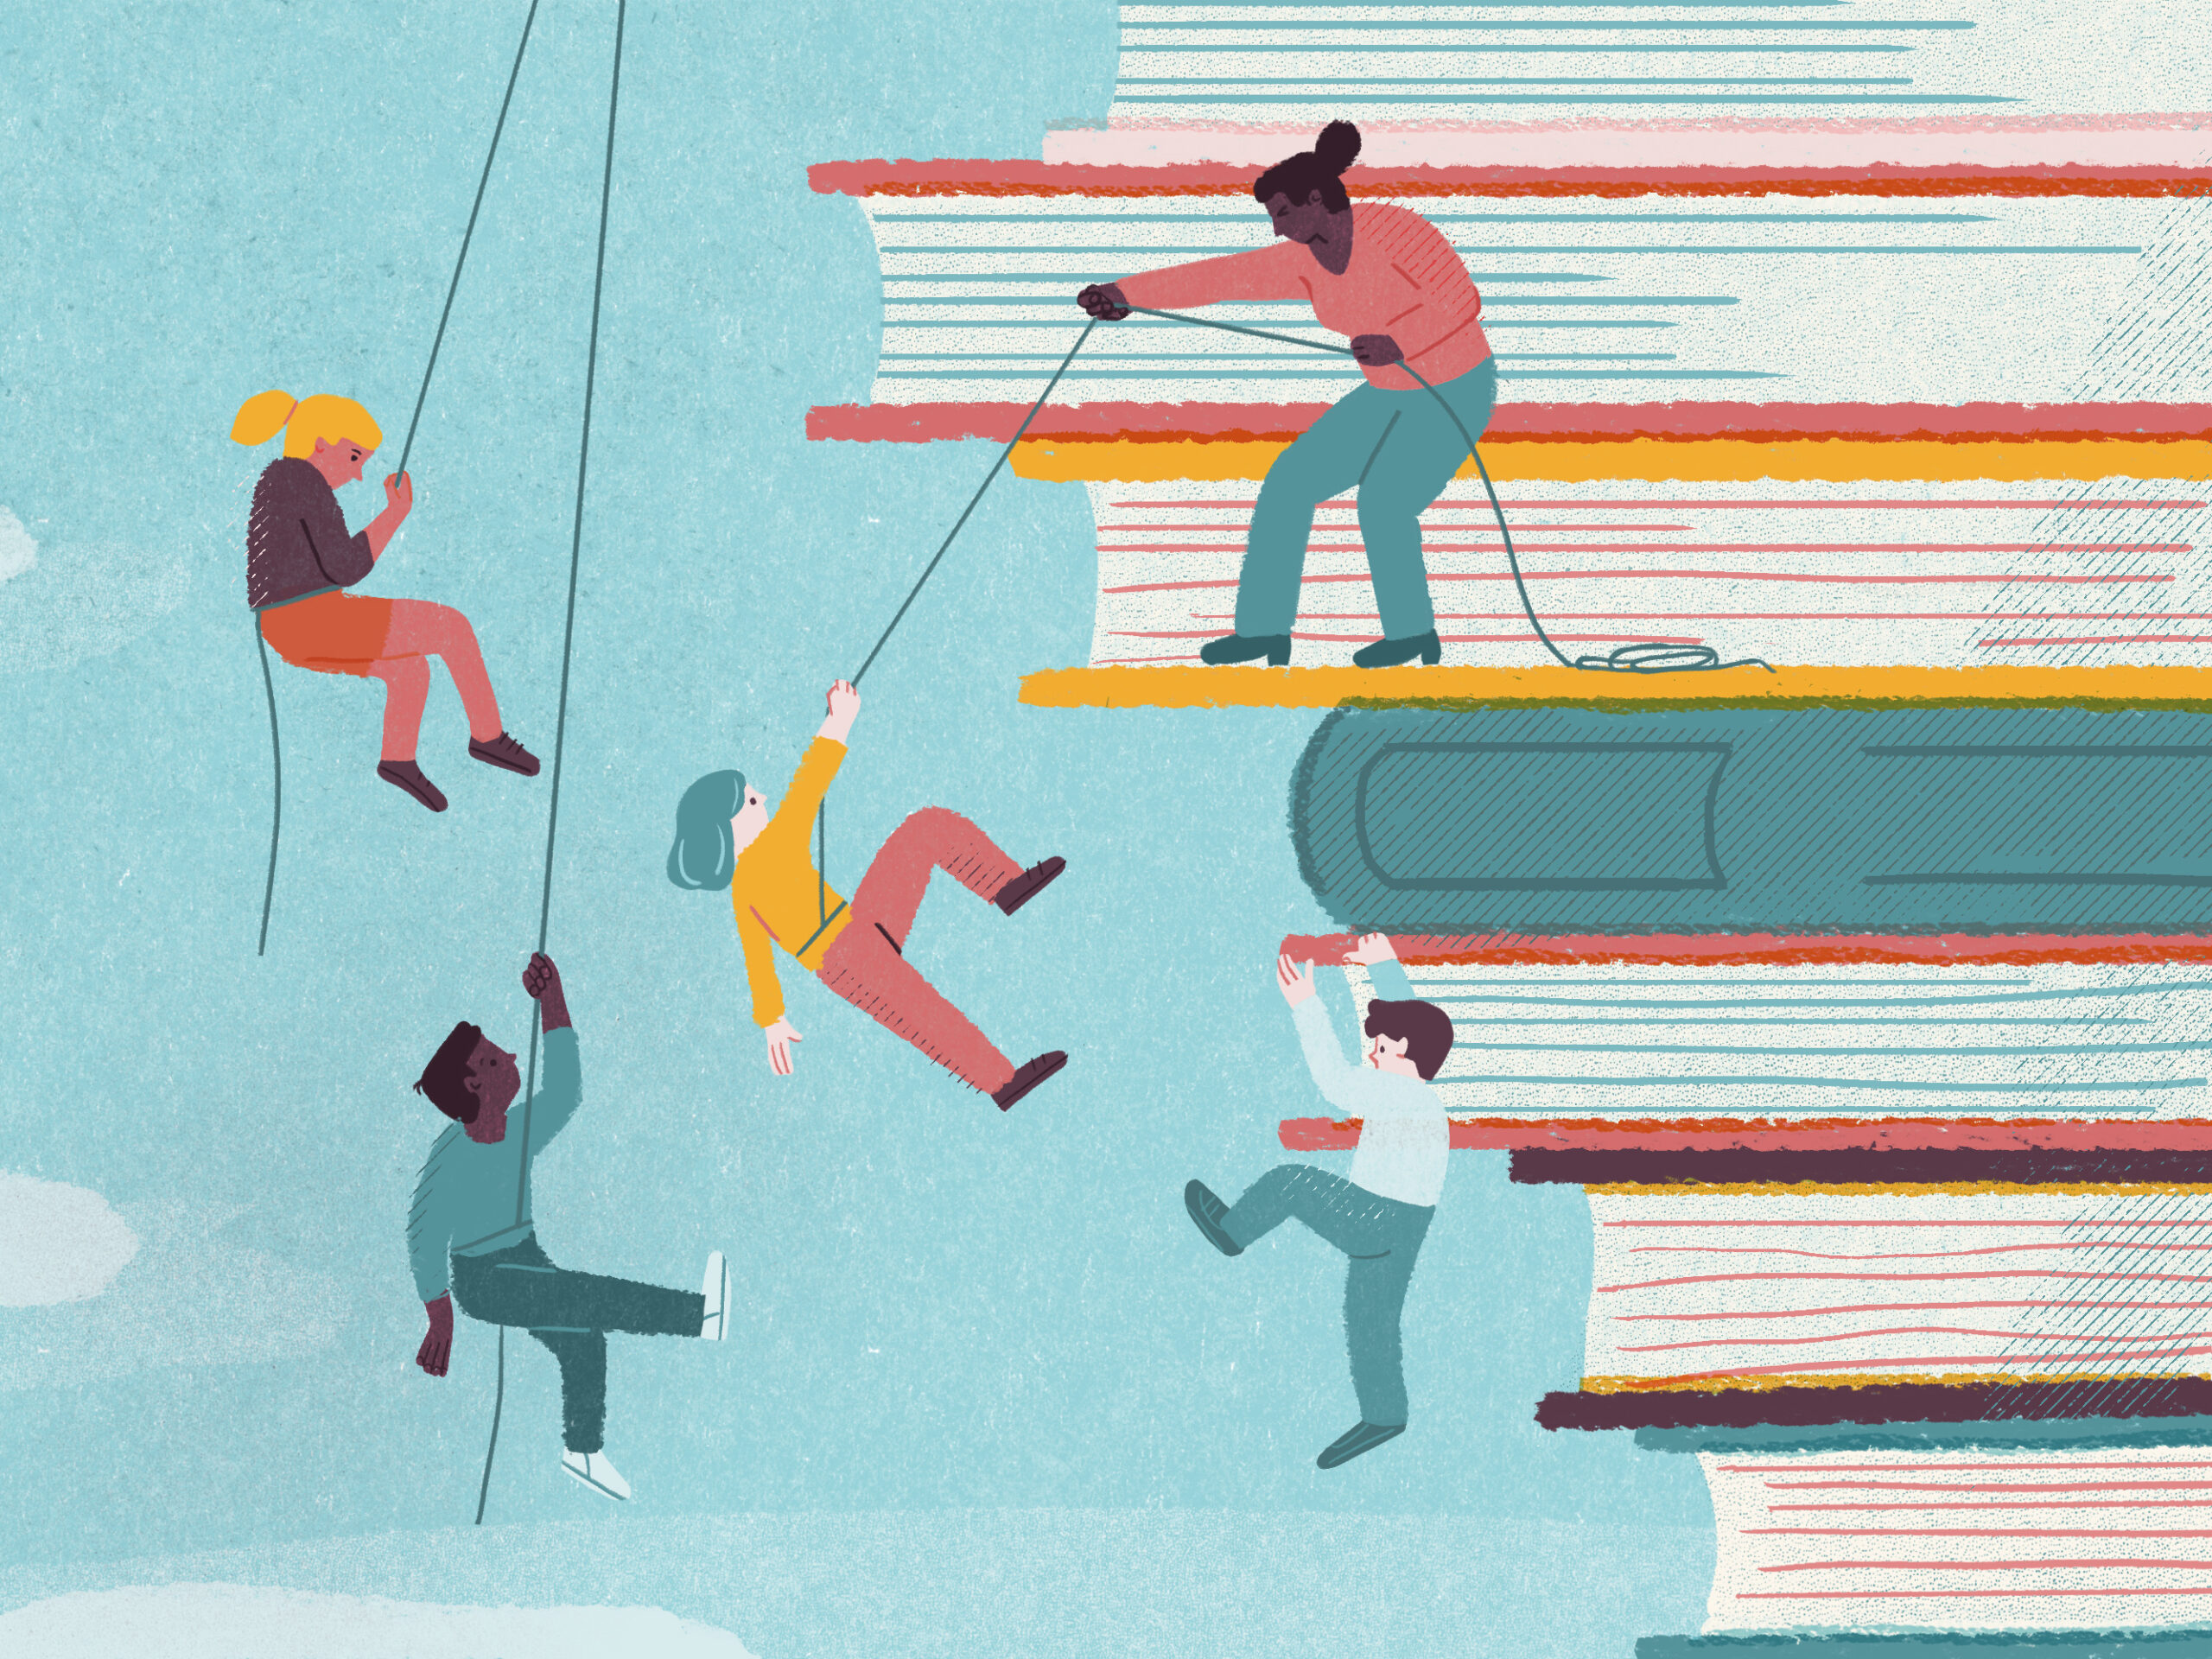 Teacher training programs don’t always use research-backed reading methods